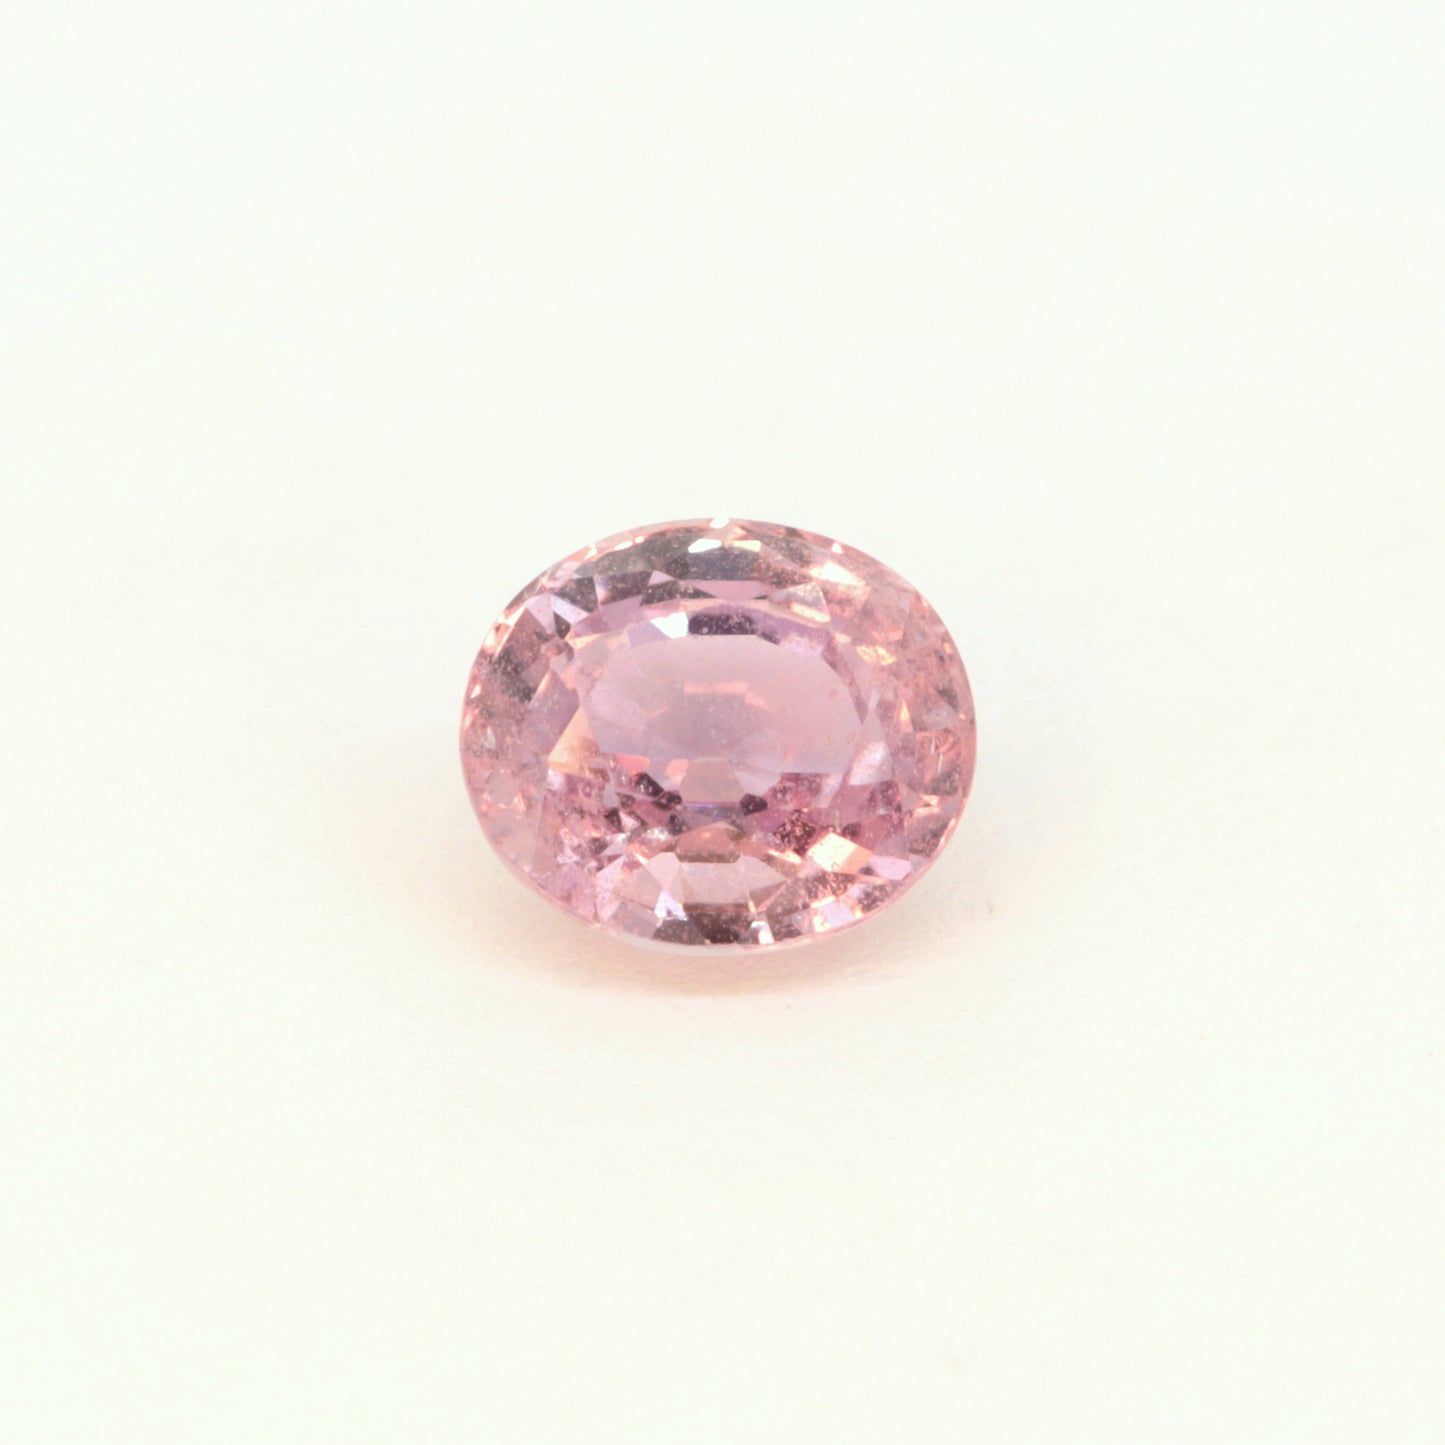 1.22 ct pink sapphire oval